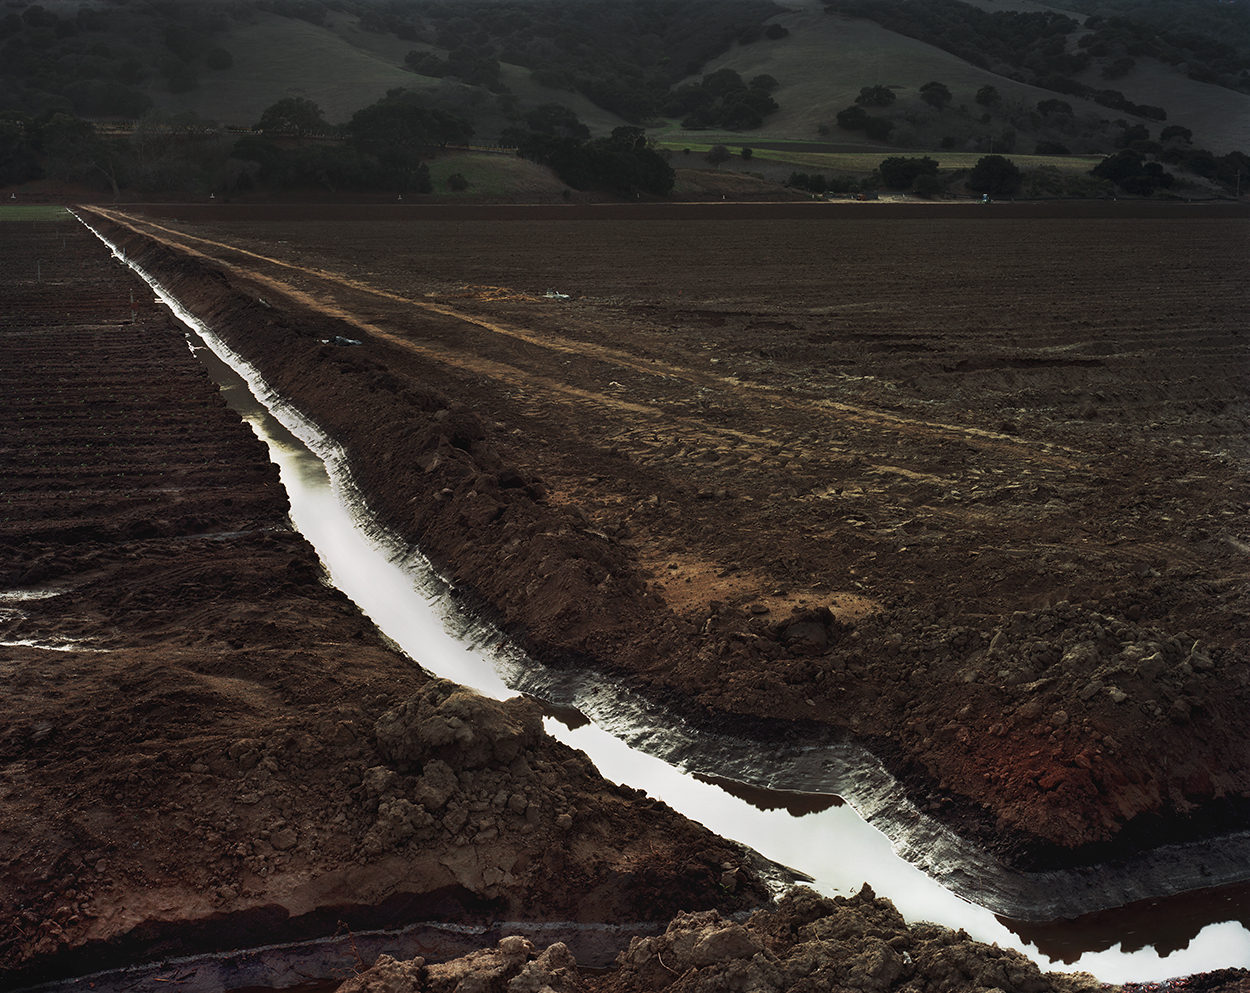 IRRIGATION, The River Road, Salinas Valley 